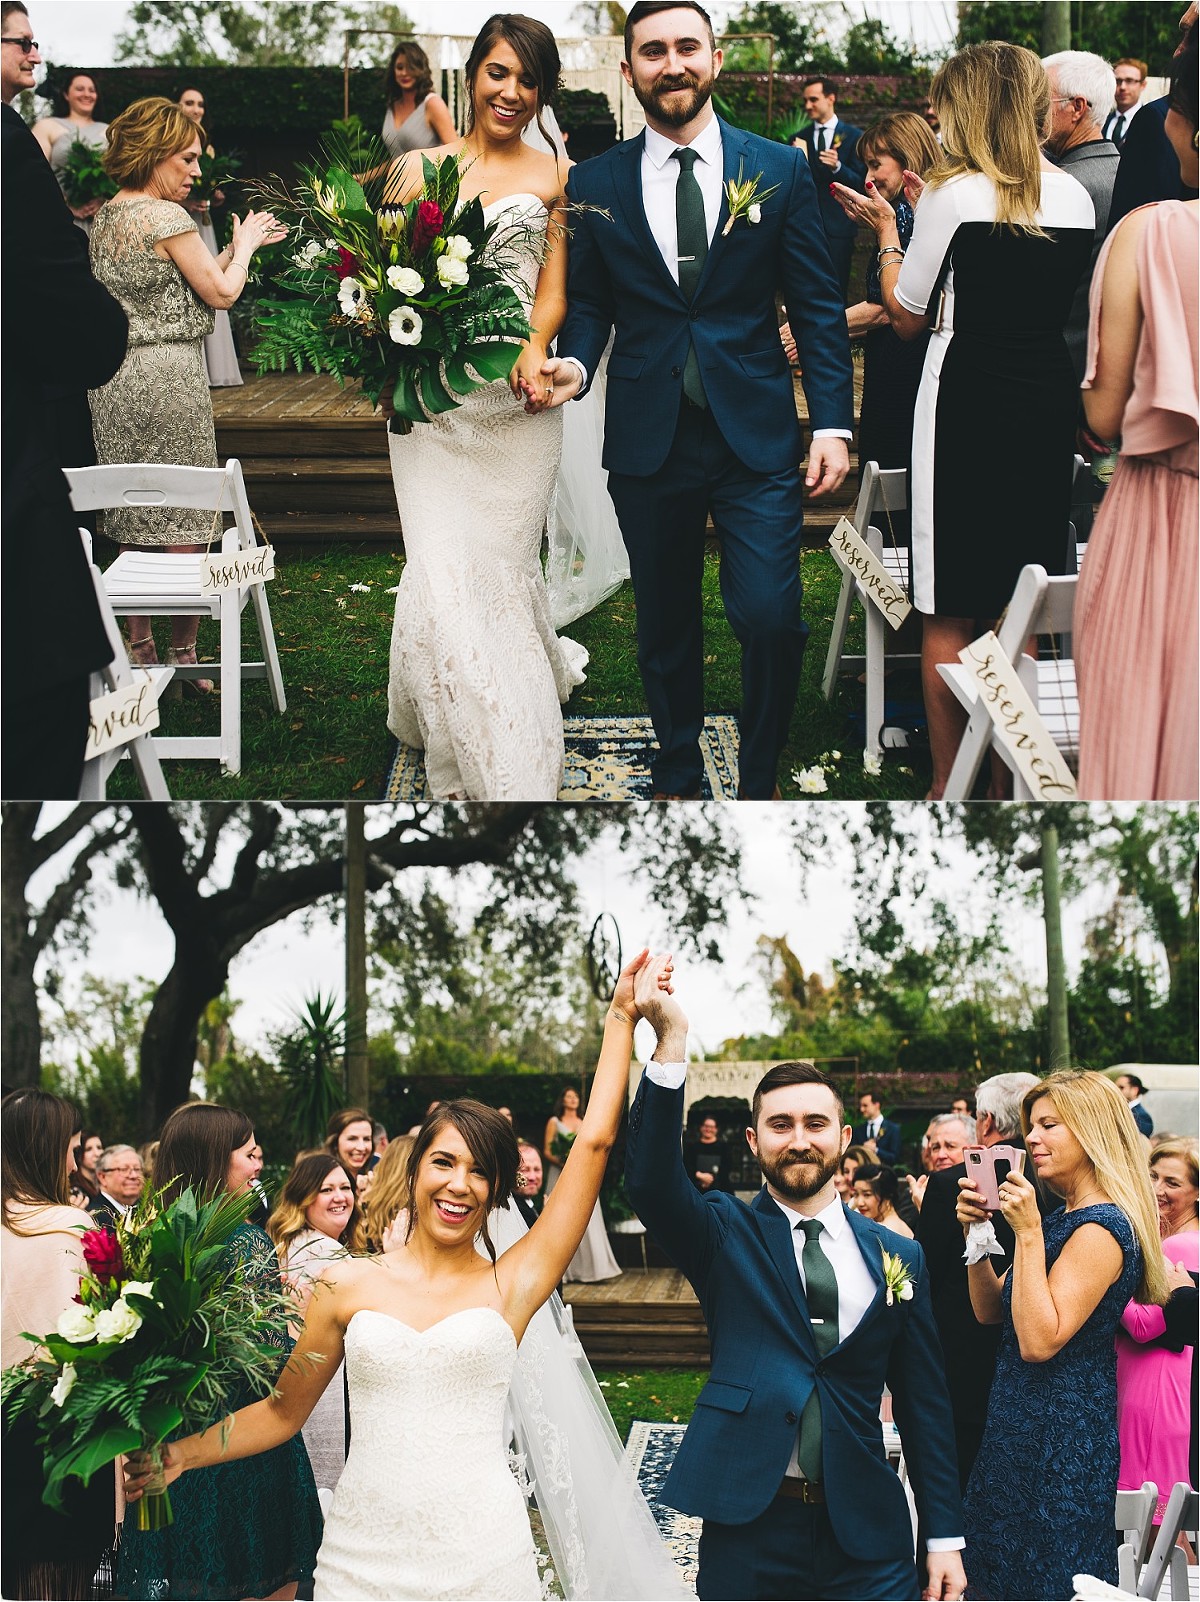 Grey & White Ethereal Wedding at the Acre | Ivy & Alex